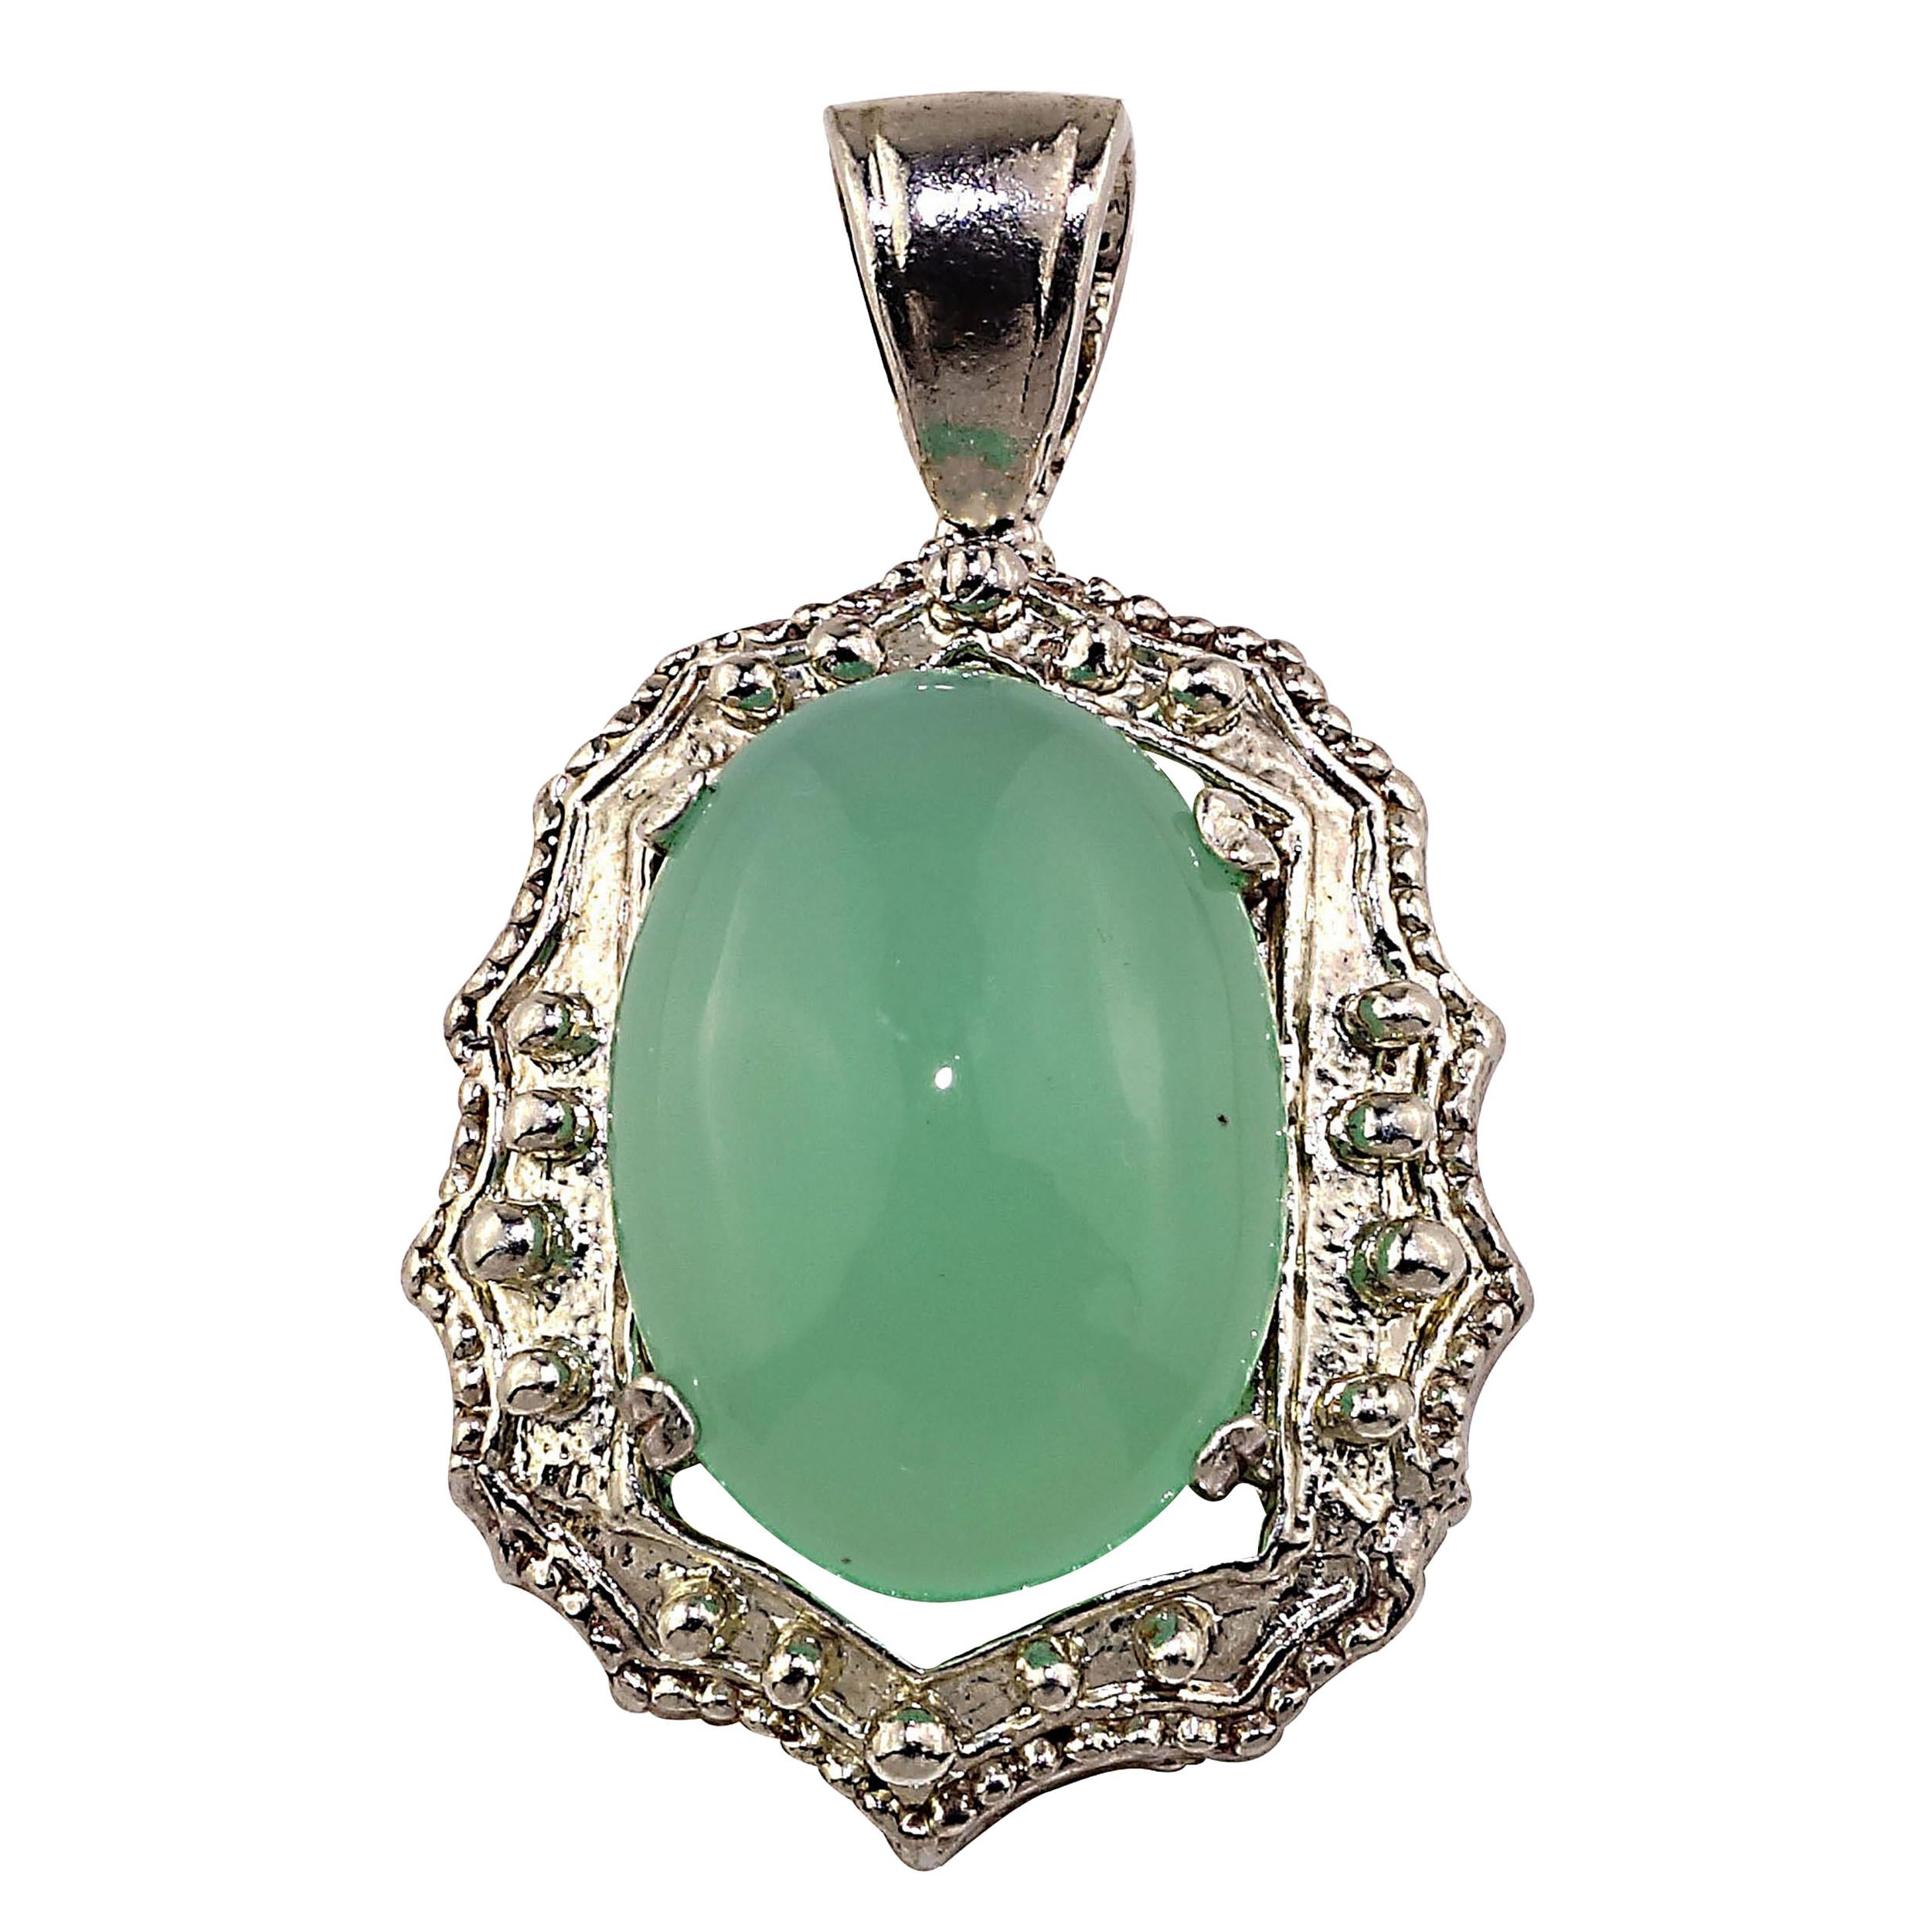 AJD Glowing Translucent Cabochon Chrysophrase in Sterling Silver Pendant For Sale